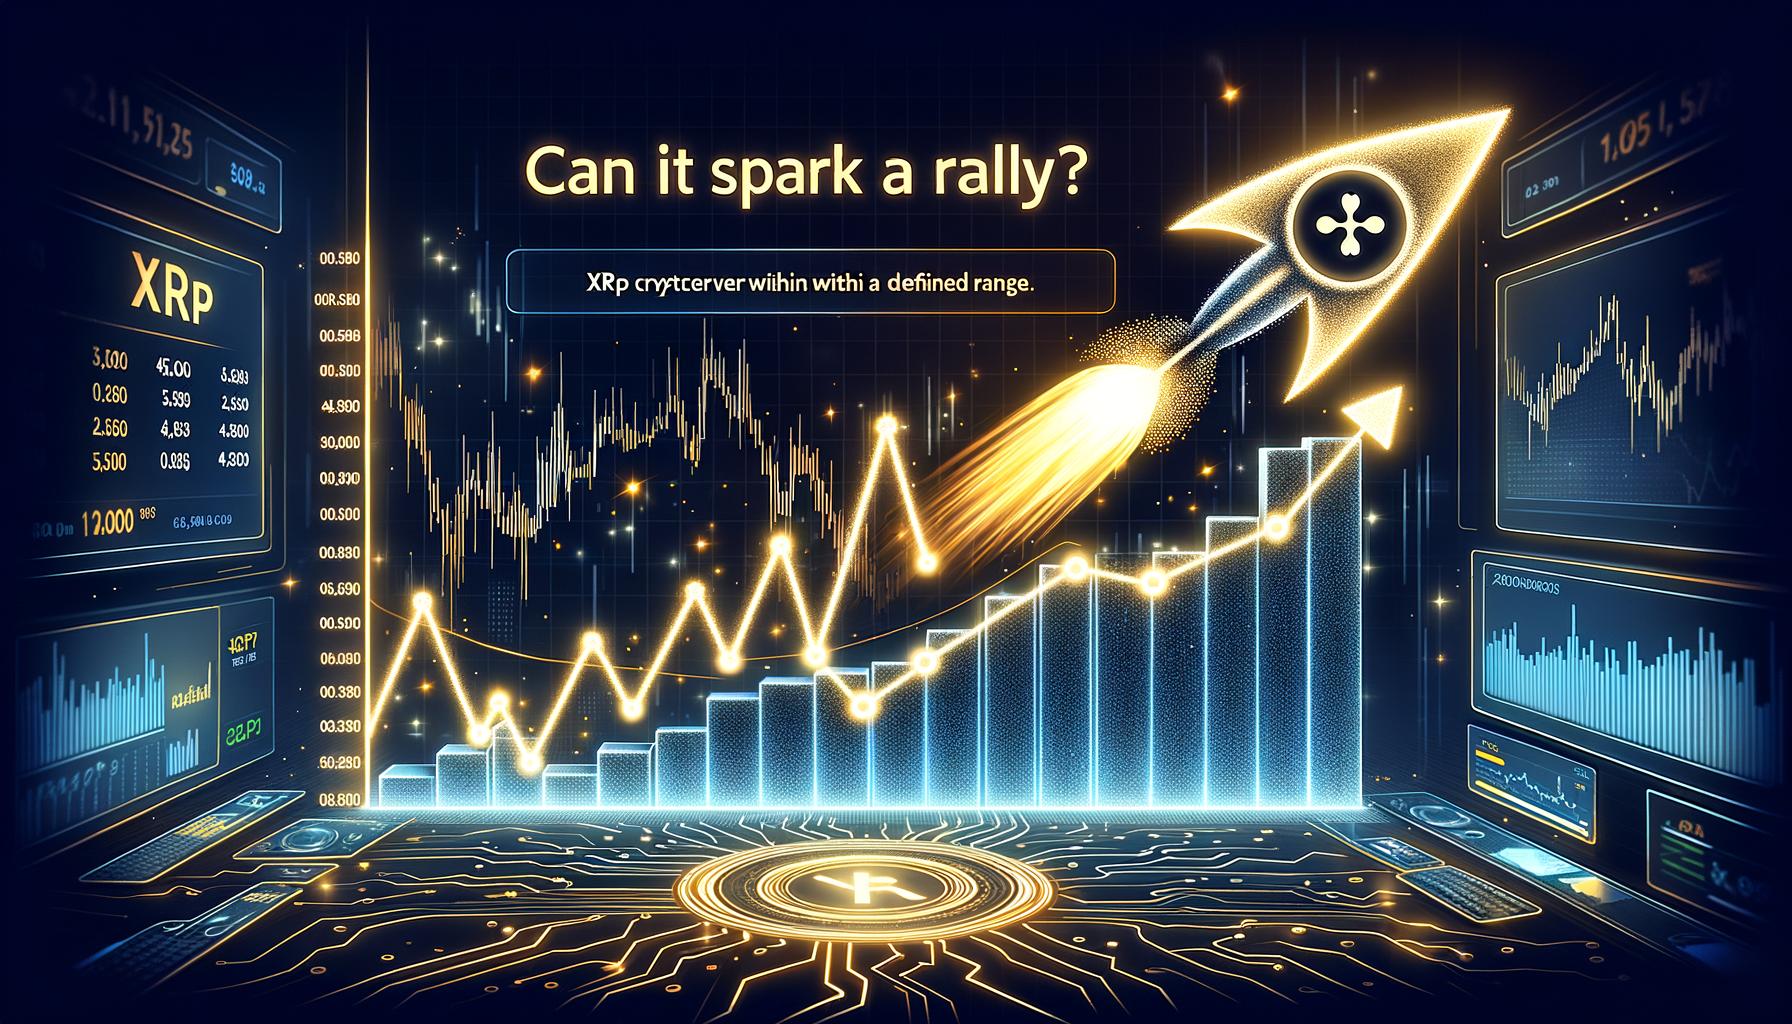 XRP Price Shows Signs of Recovery